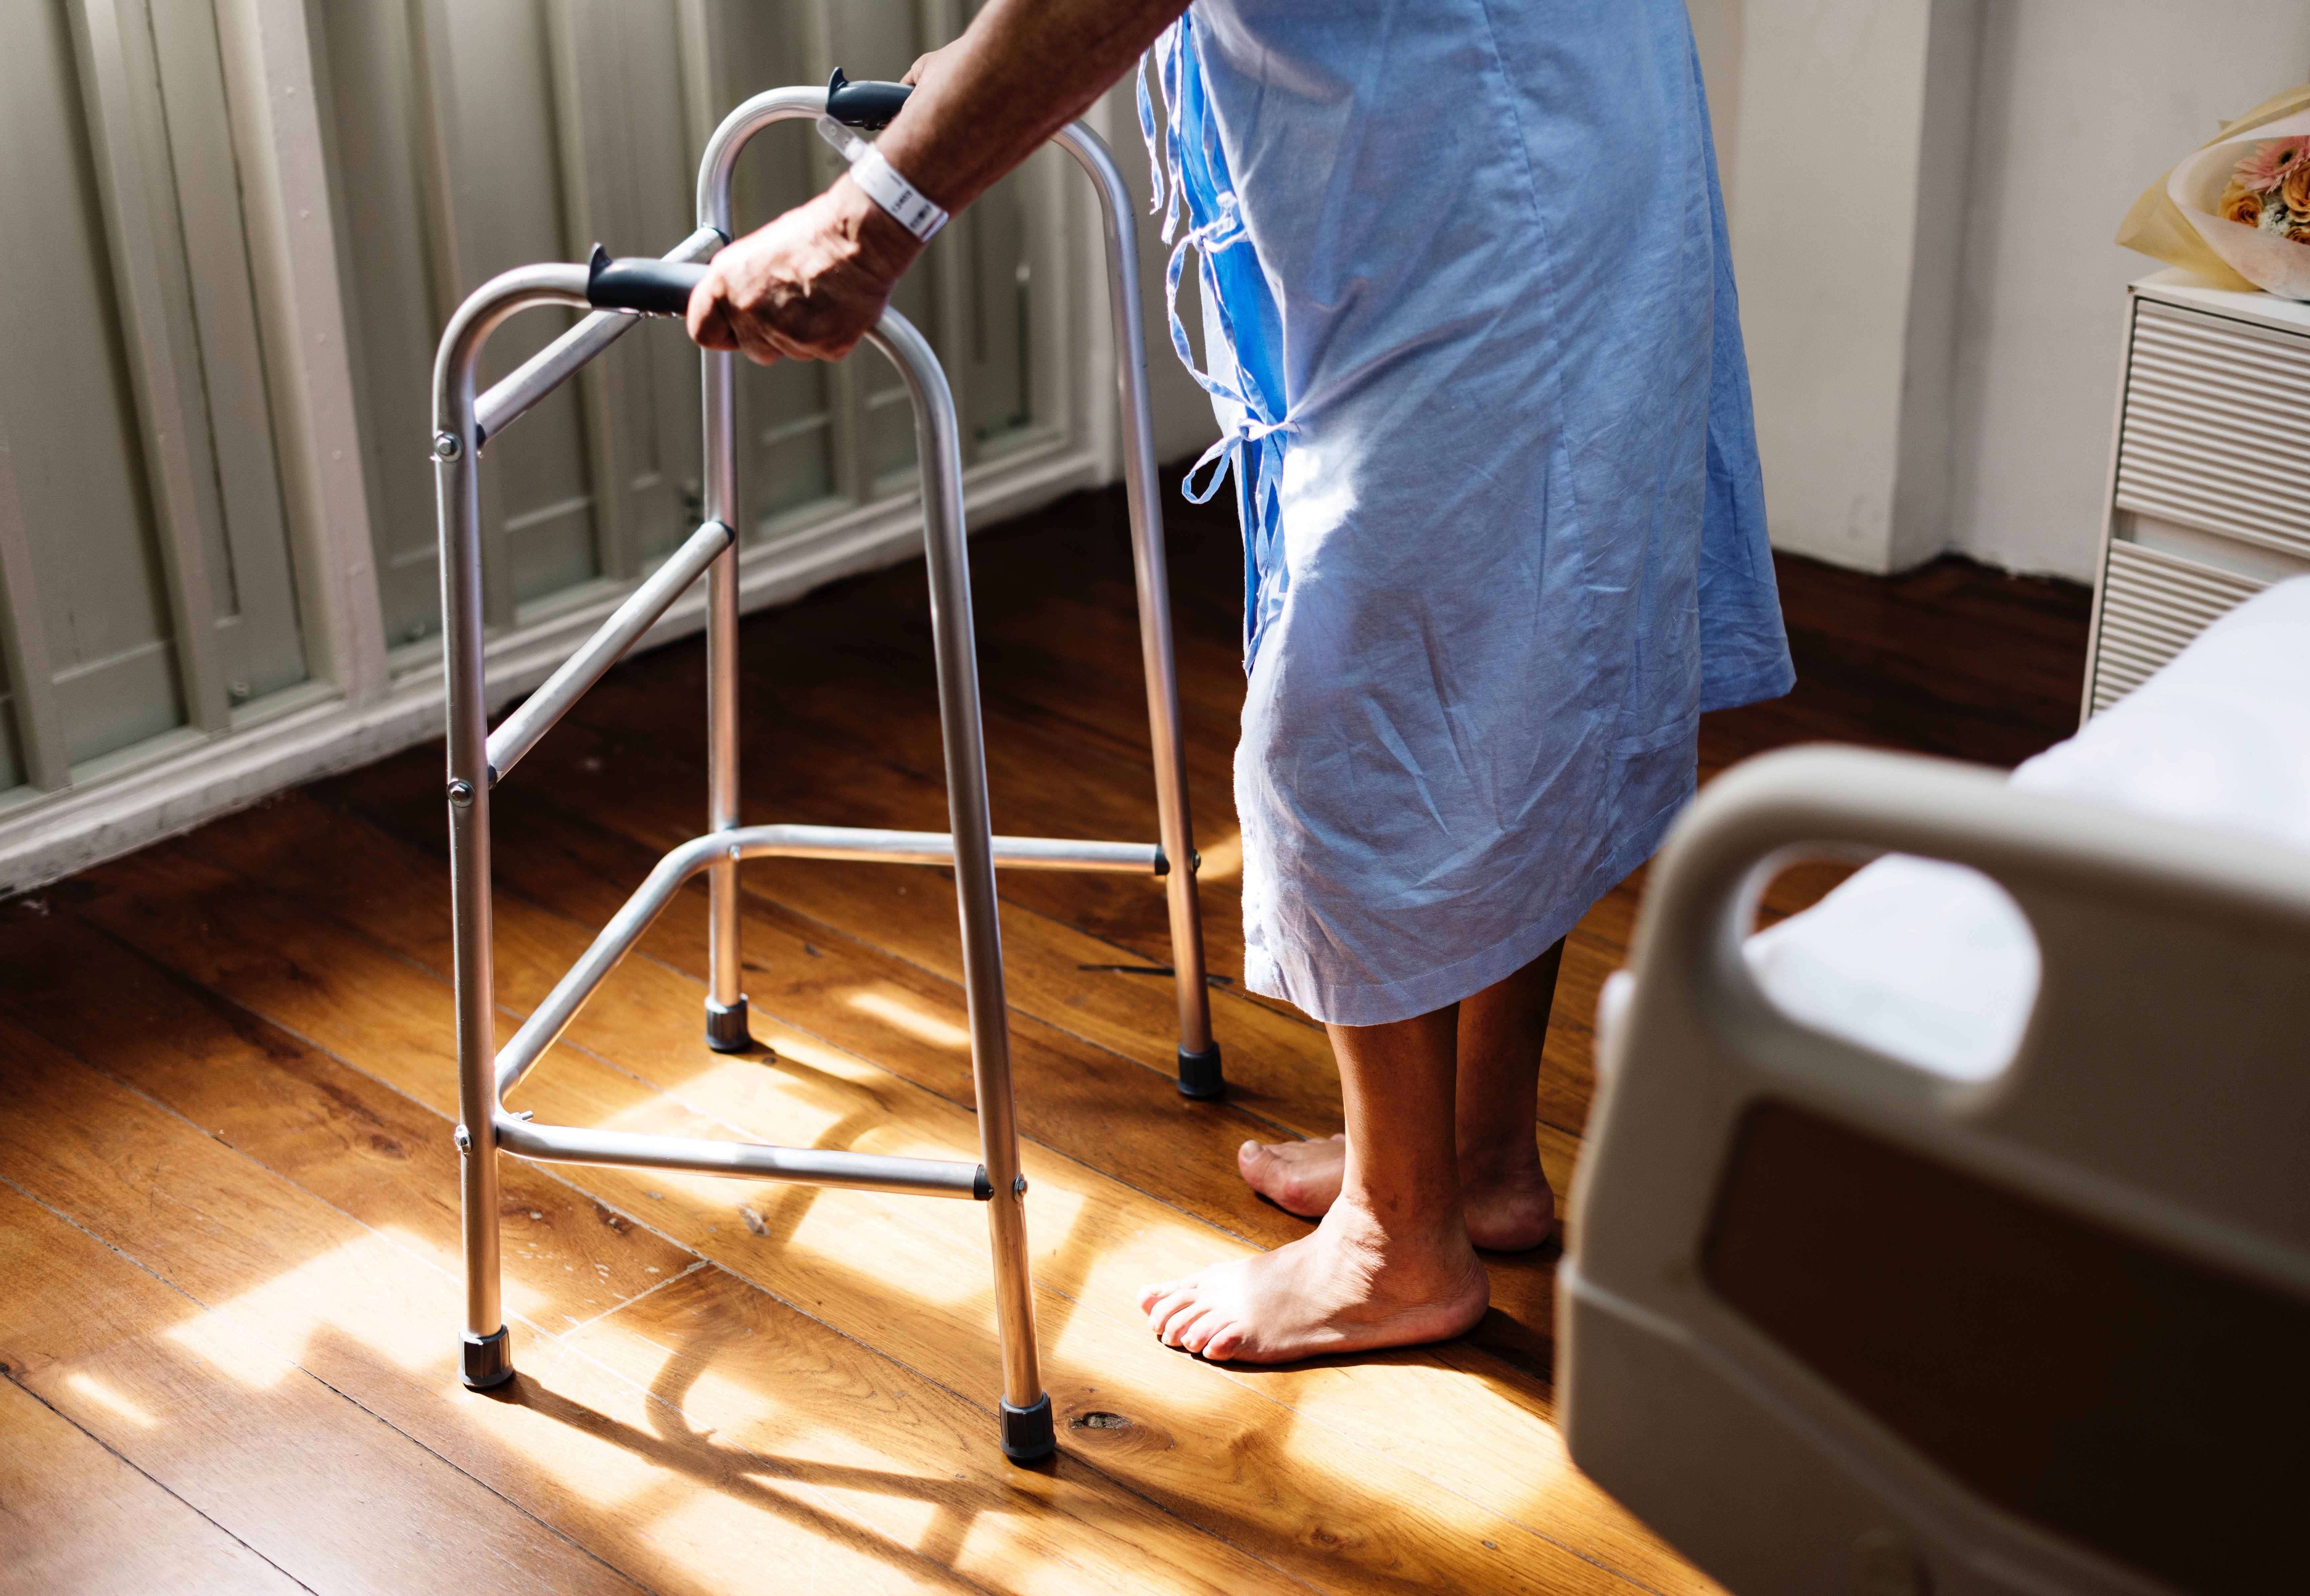 Old man in a hospital trying to walk. | Source: Pexels